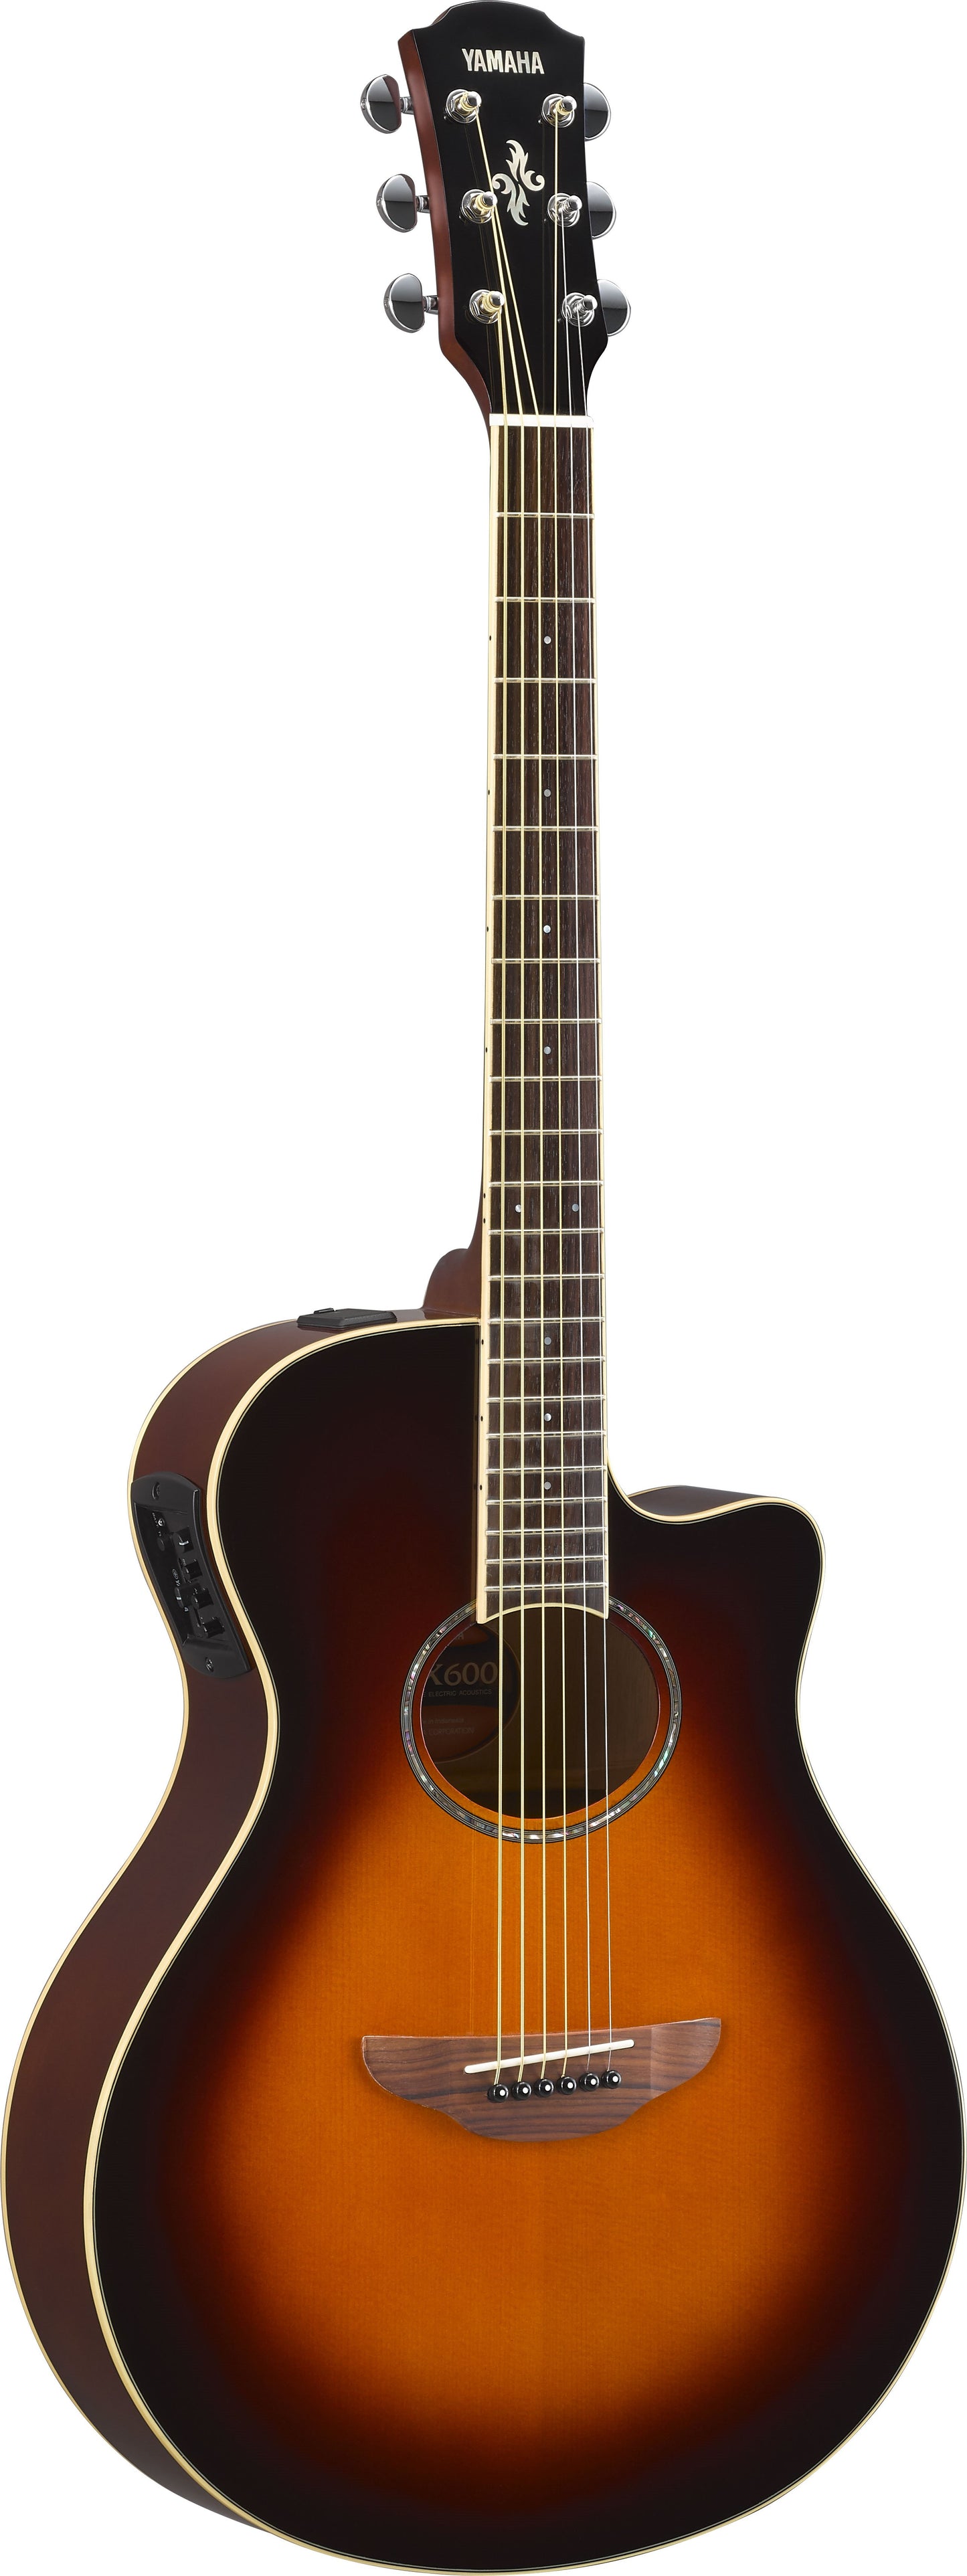 Yamaha APX600 Electric Acoustic Guitar